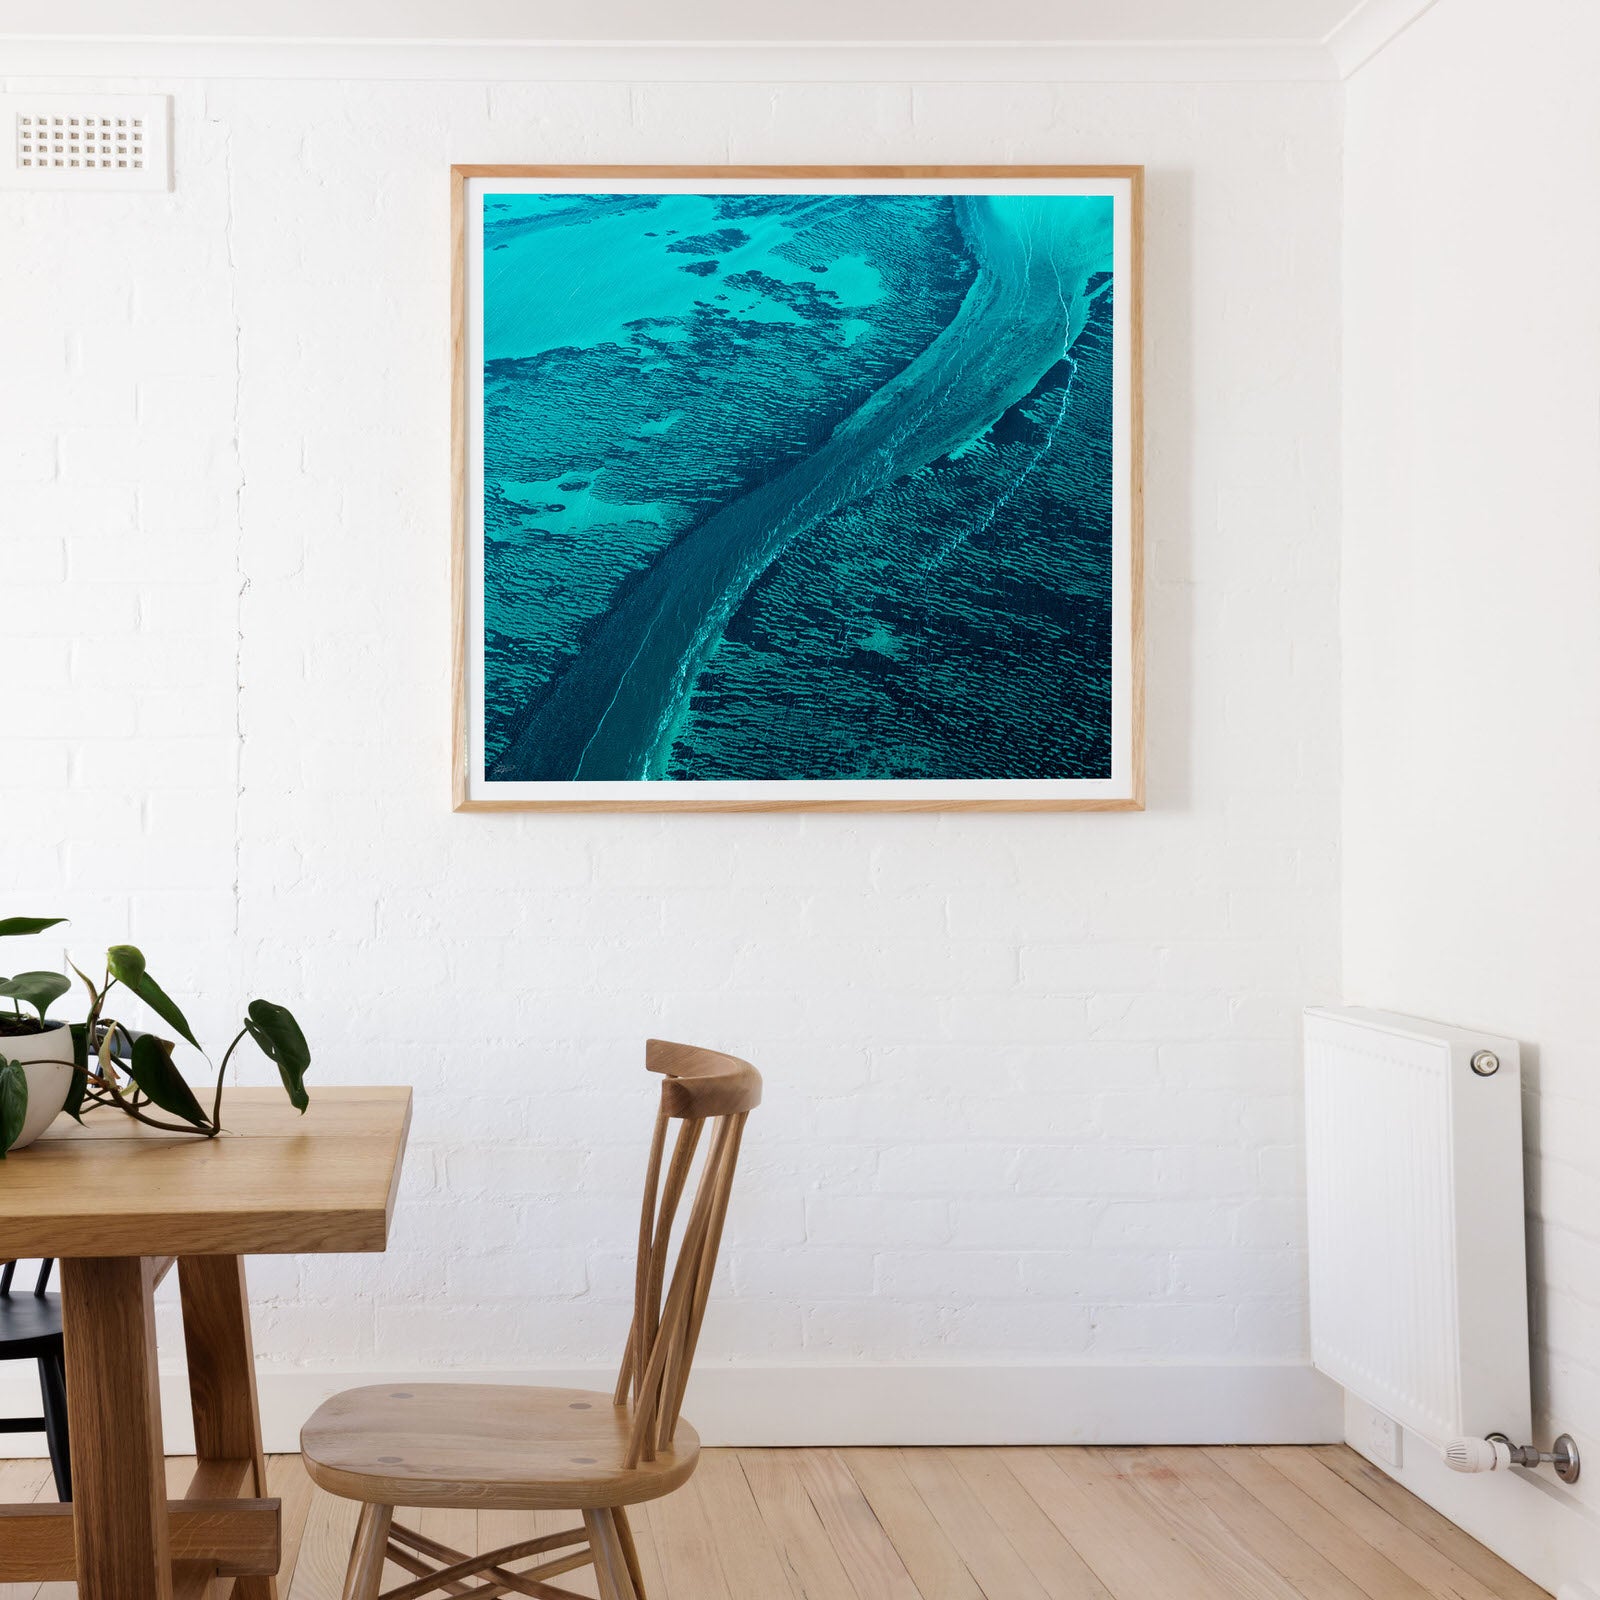 Square frame with abstract art print in blue and green near table